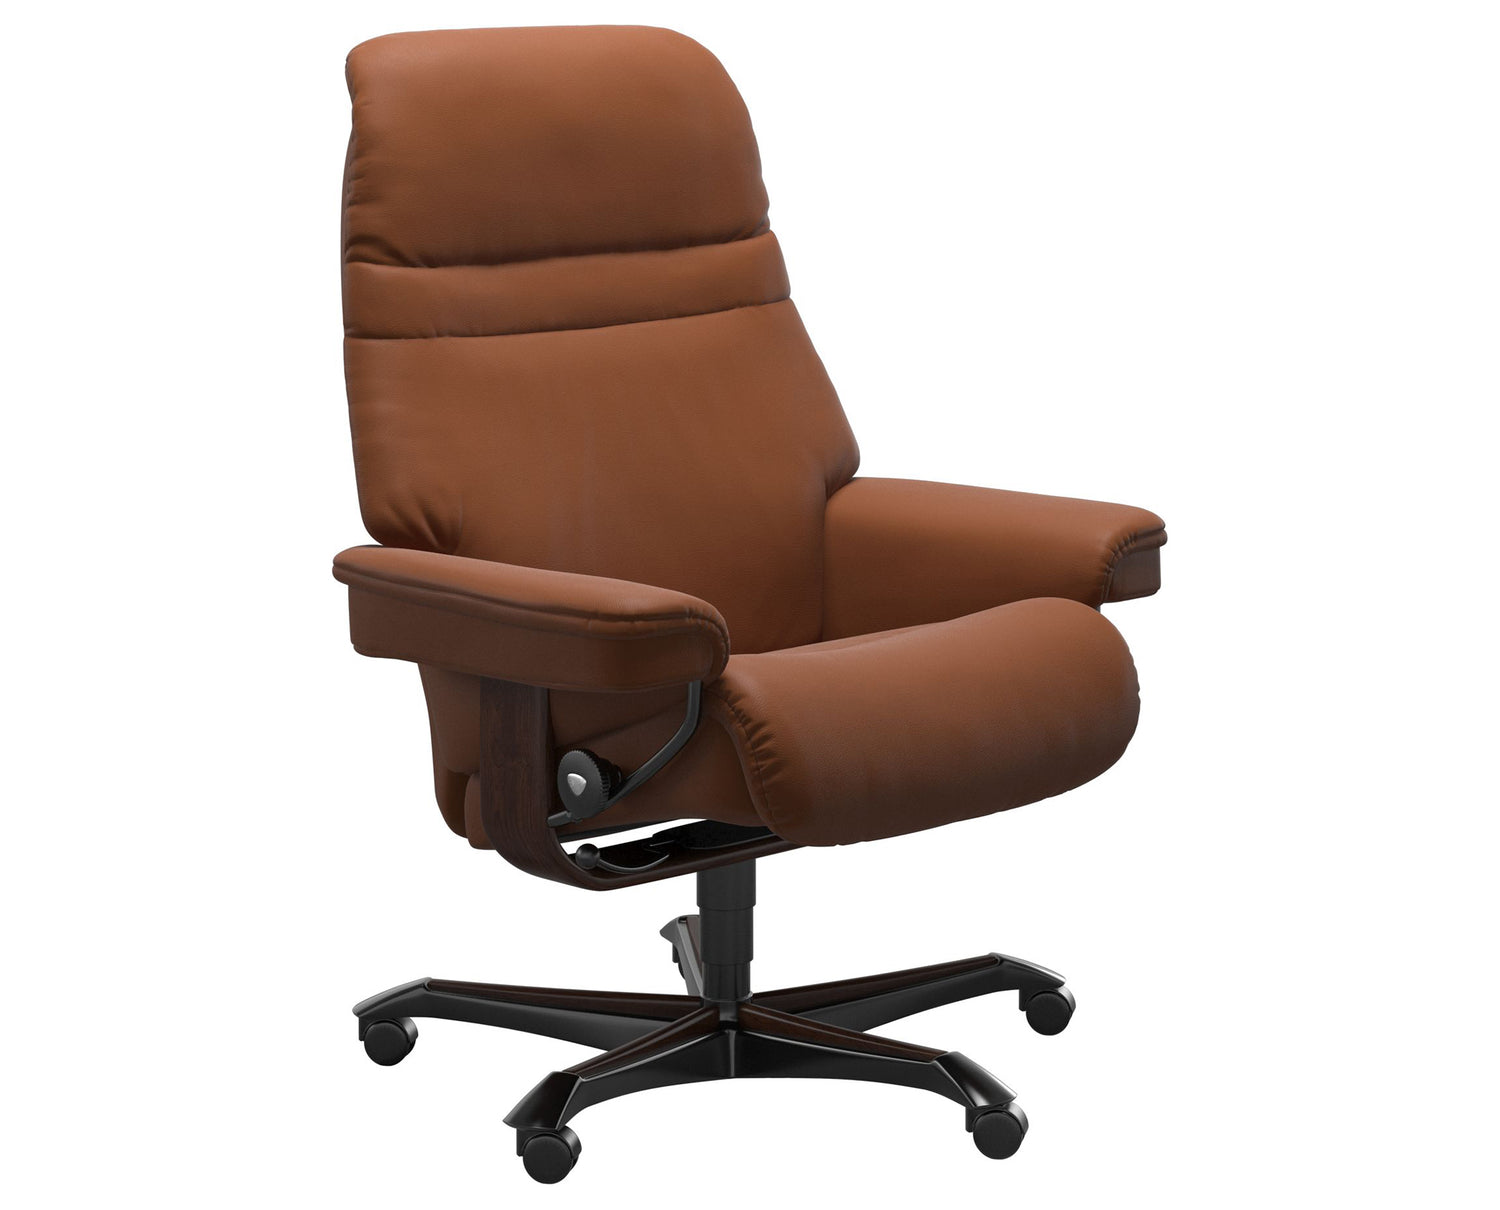 Paloma Leather New Cognac M & Brown Base | Stressless Sunrise Home Office Chair | Valley Ridge Furniture